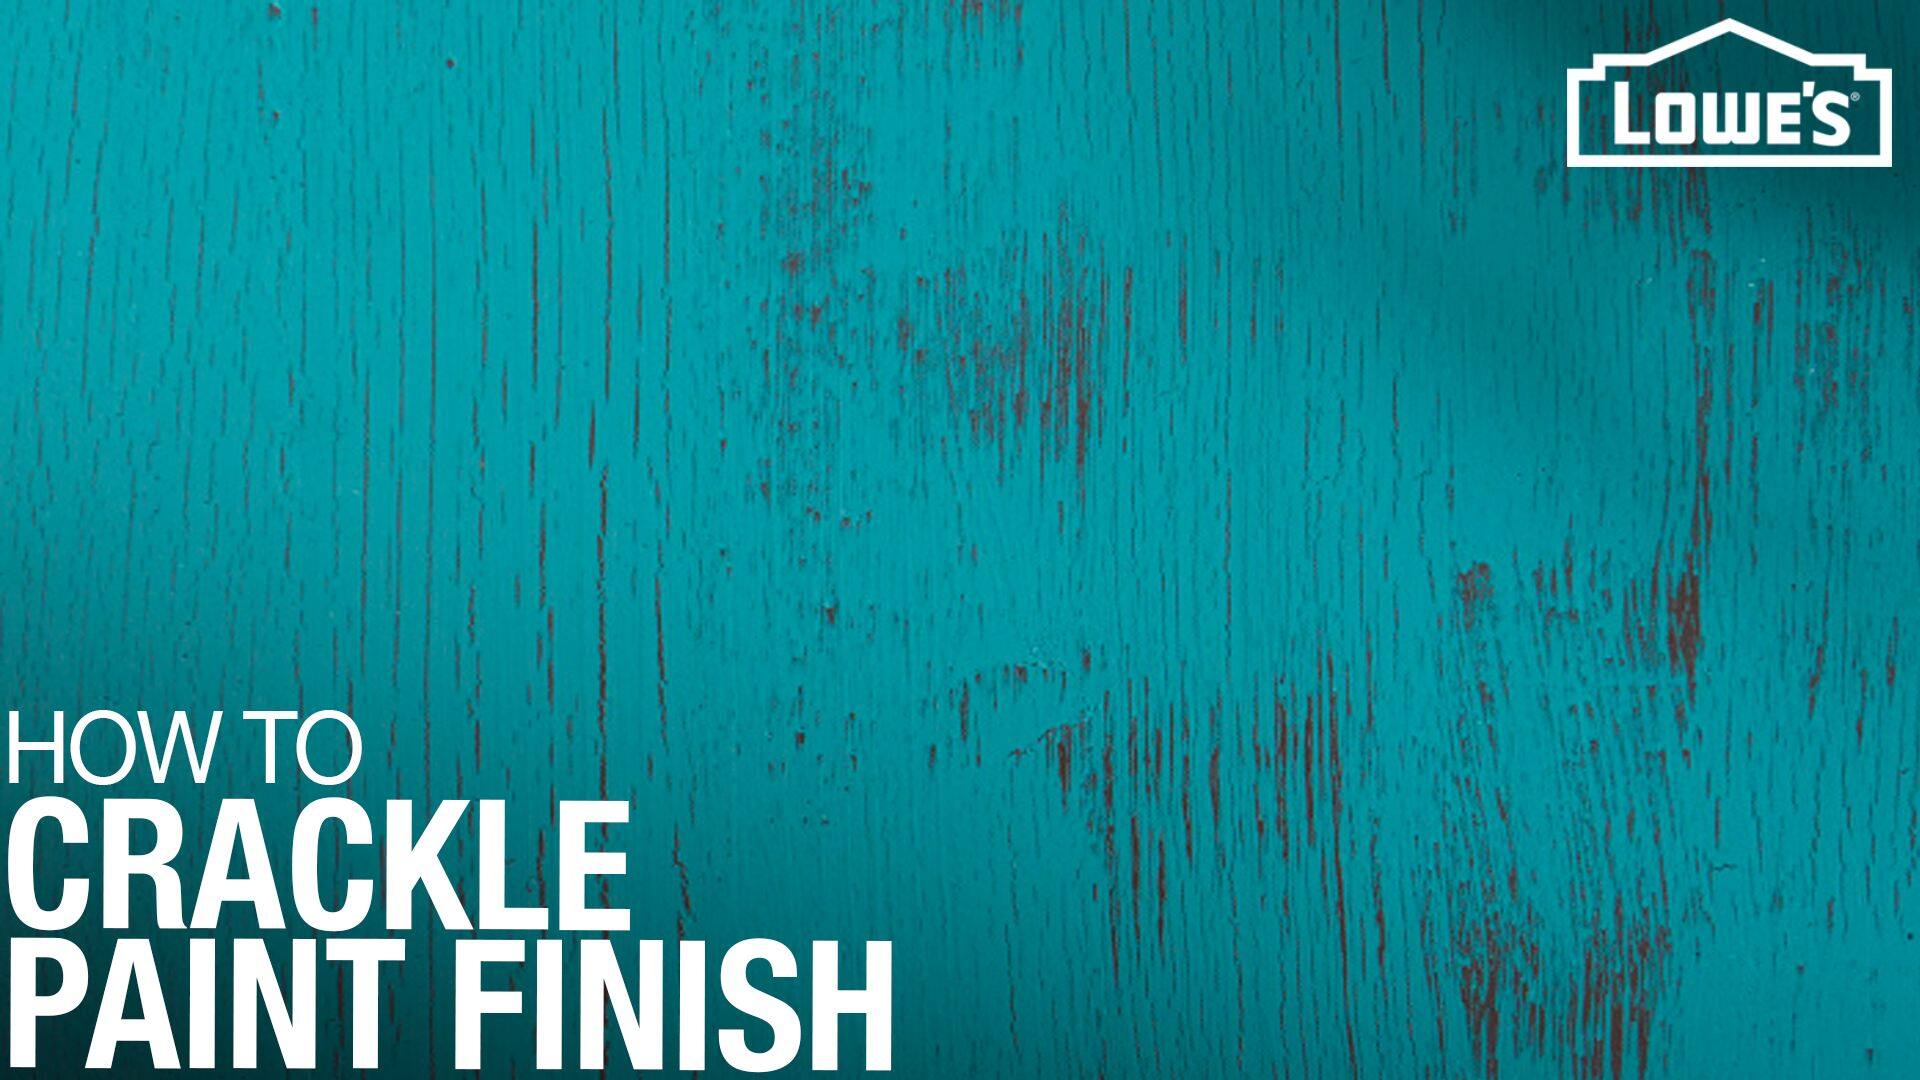 How to Crackle Paint Finish 